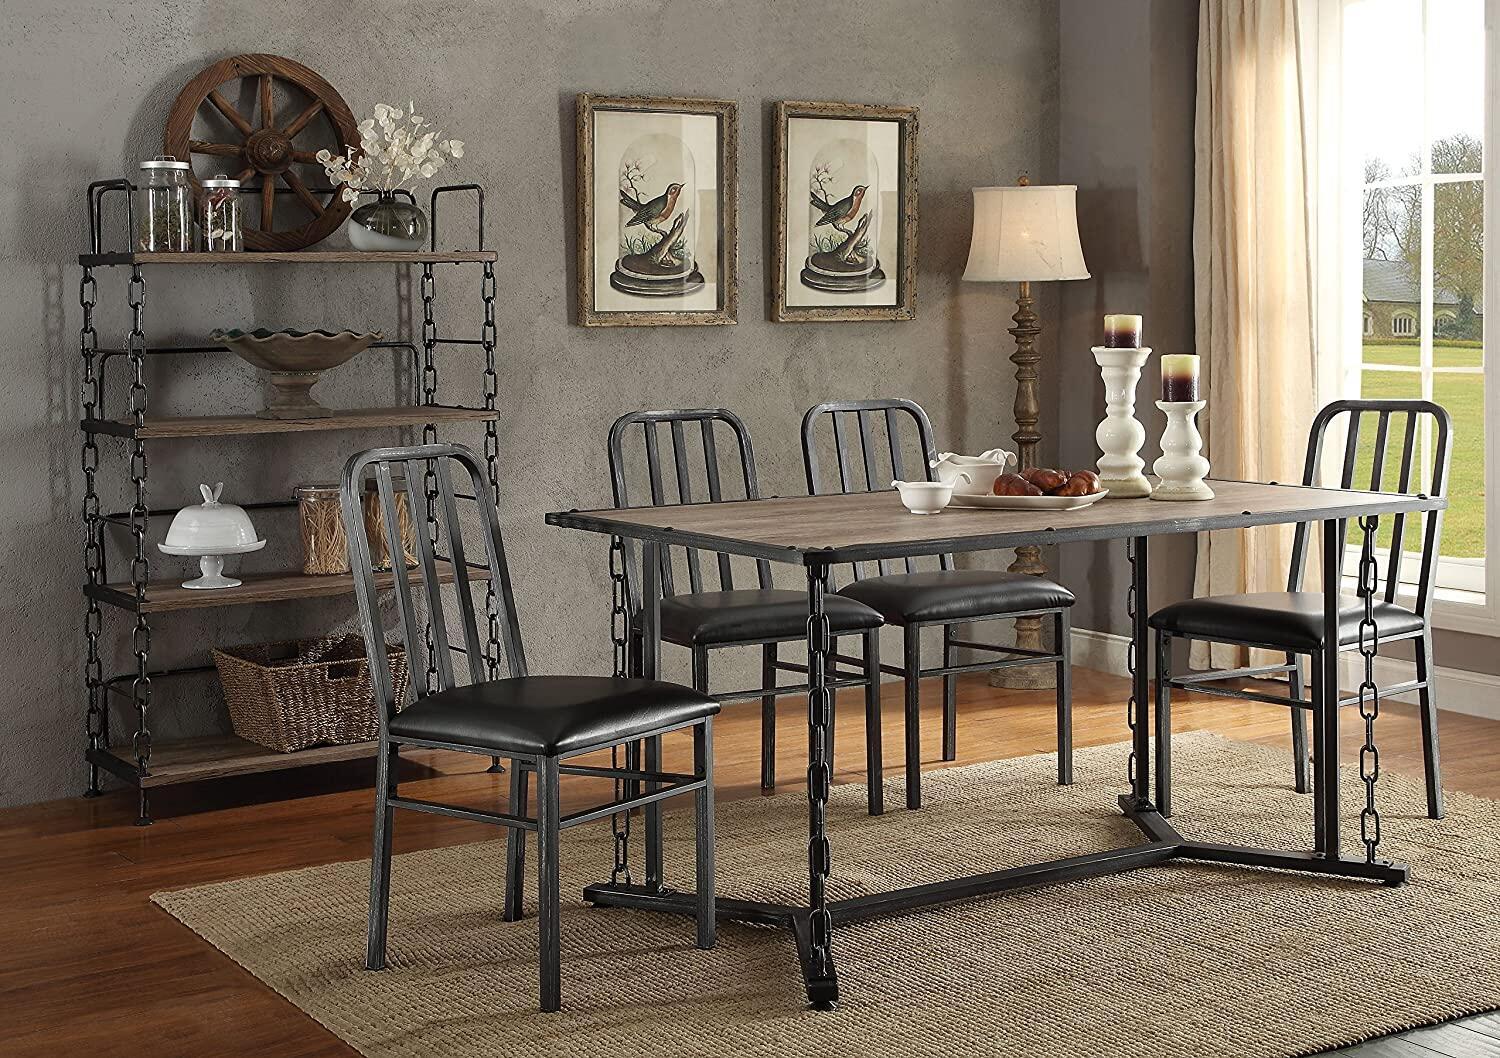 Contemporary, Casual Dining Room Set Jodie 71995-9pcs in Brown Oak, Black 